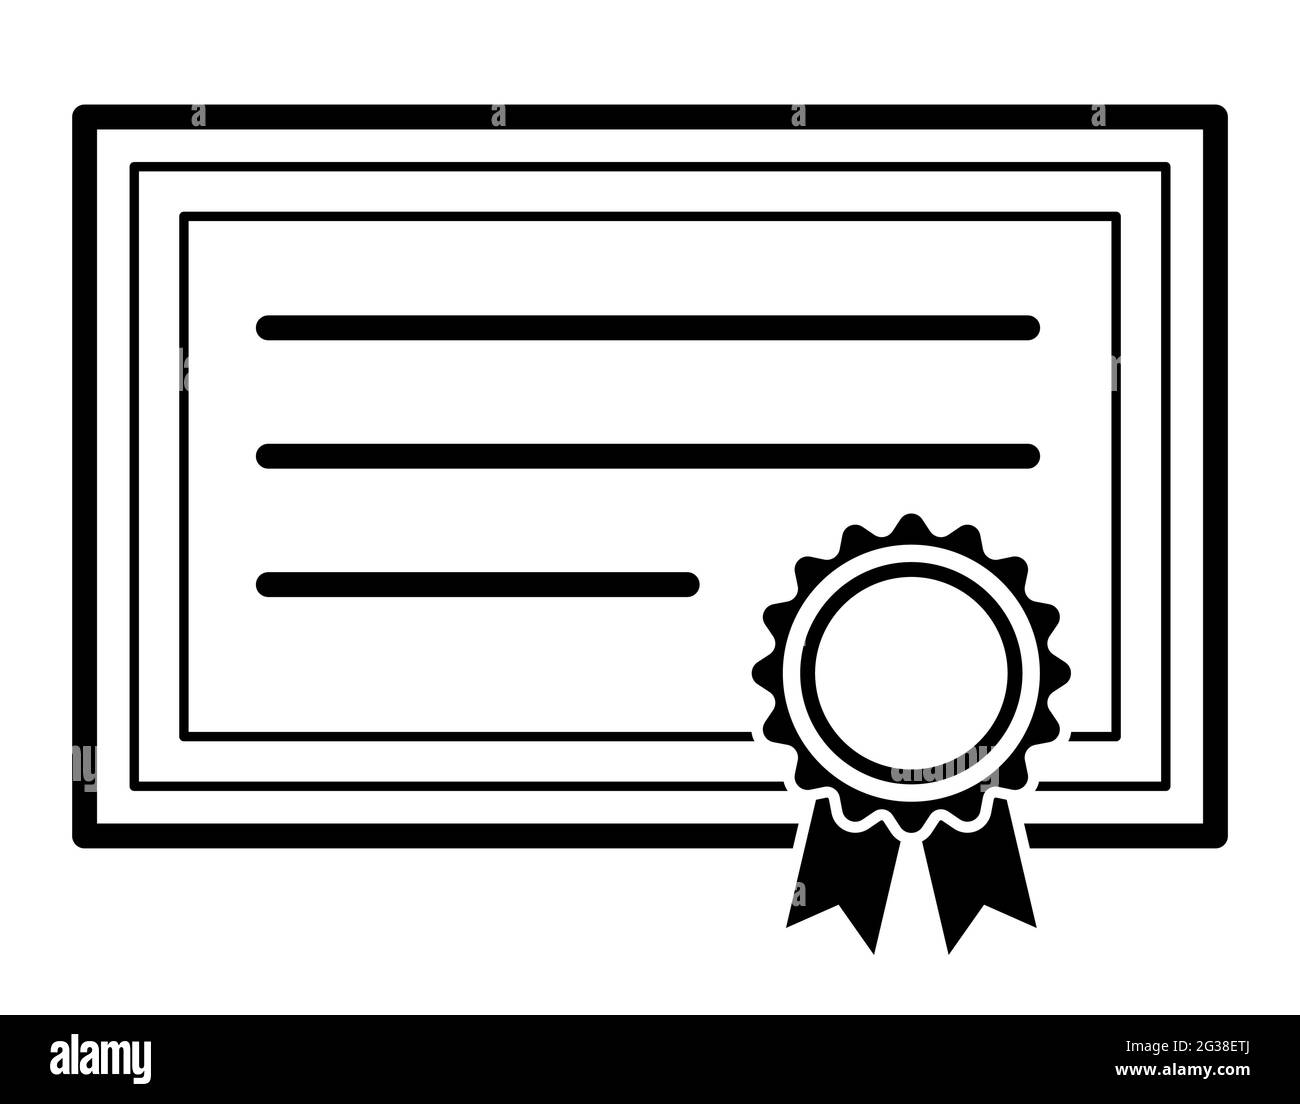 Awarding certificate license paper patent award page symbol vector illustration icon Stock Vector